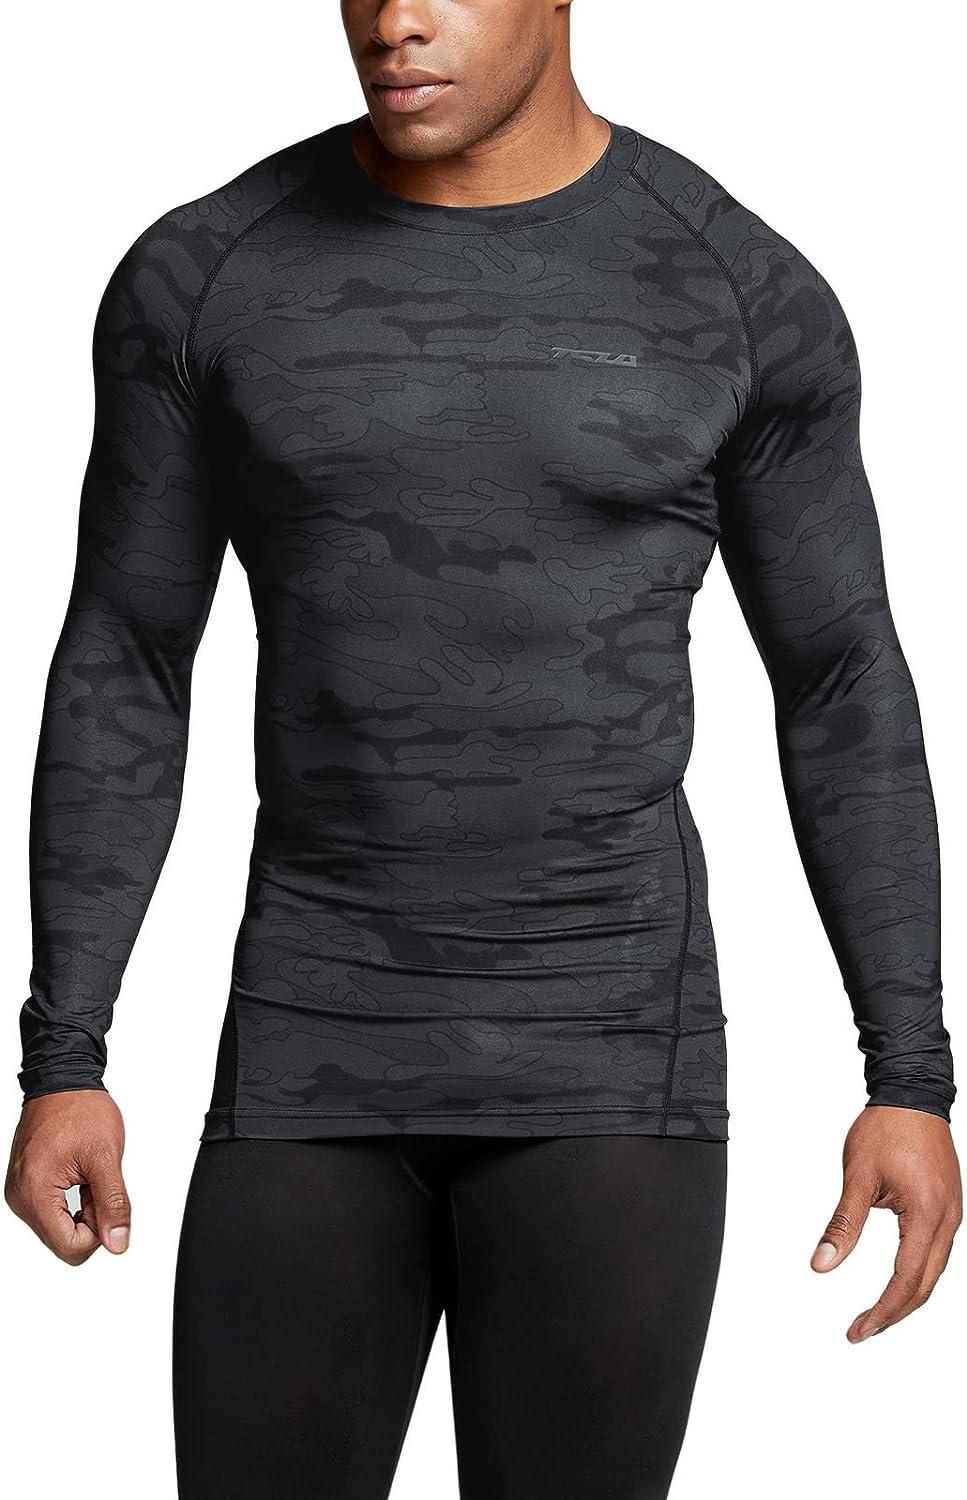  TSLA Men's UPF 50+ Long Sleeve Compression Shirts, Athletic  Workout Shirt, Water Sports Rash Guard, Athletic Crewneck Navy, X-Small :  Clothing, Shoes & Jewelry